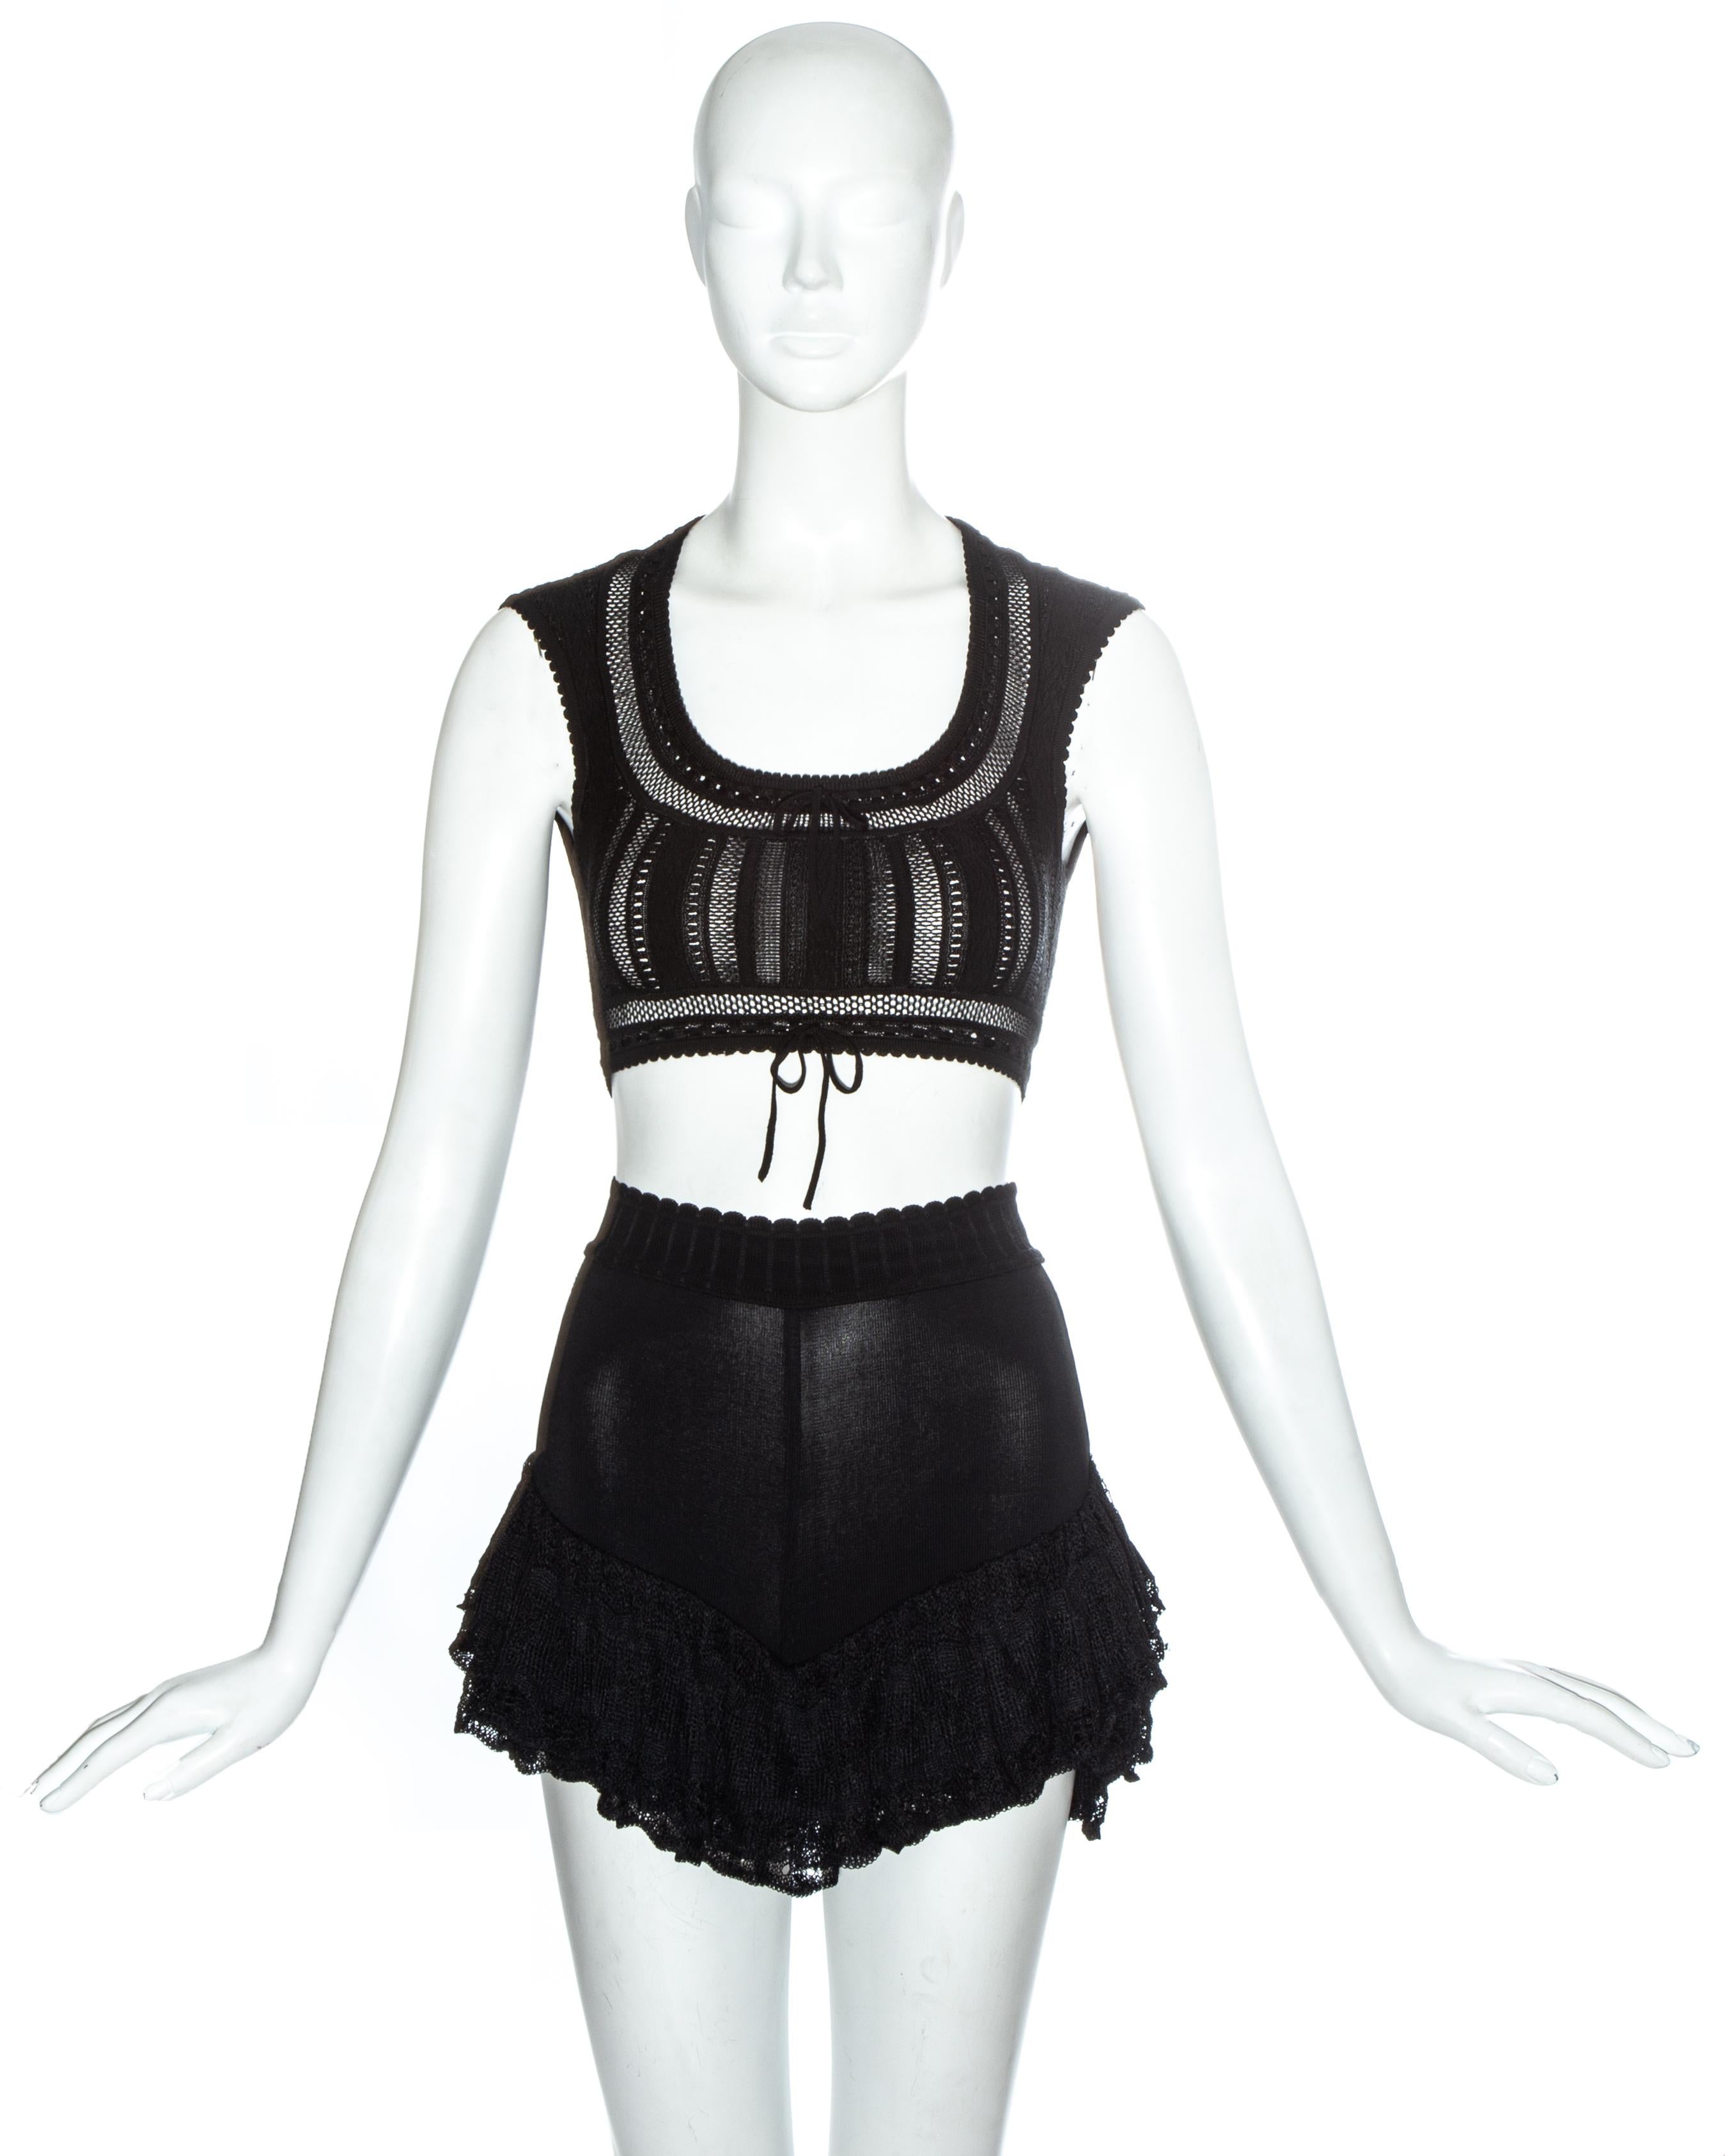 Azzedine Alaia black viscose knitted ruffled mini shorts and crop top with drawstring fastening

Spring-Summer 1993
